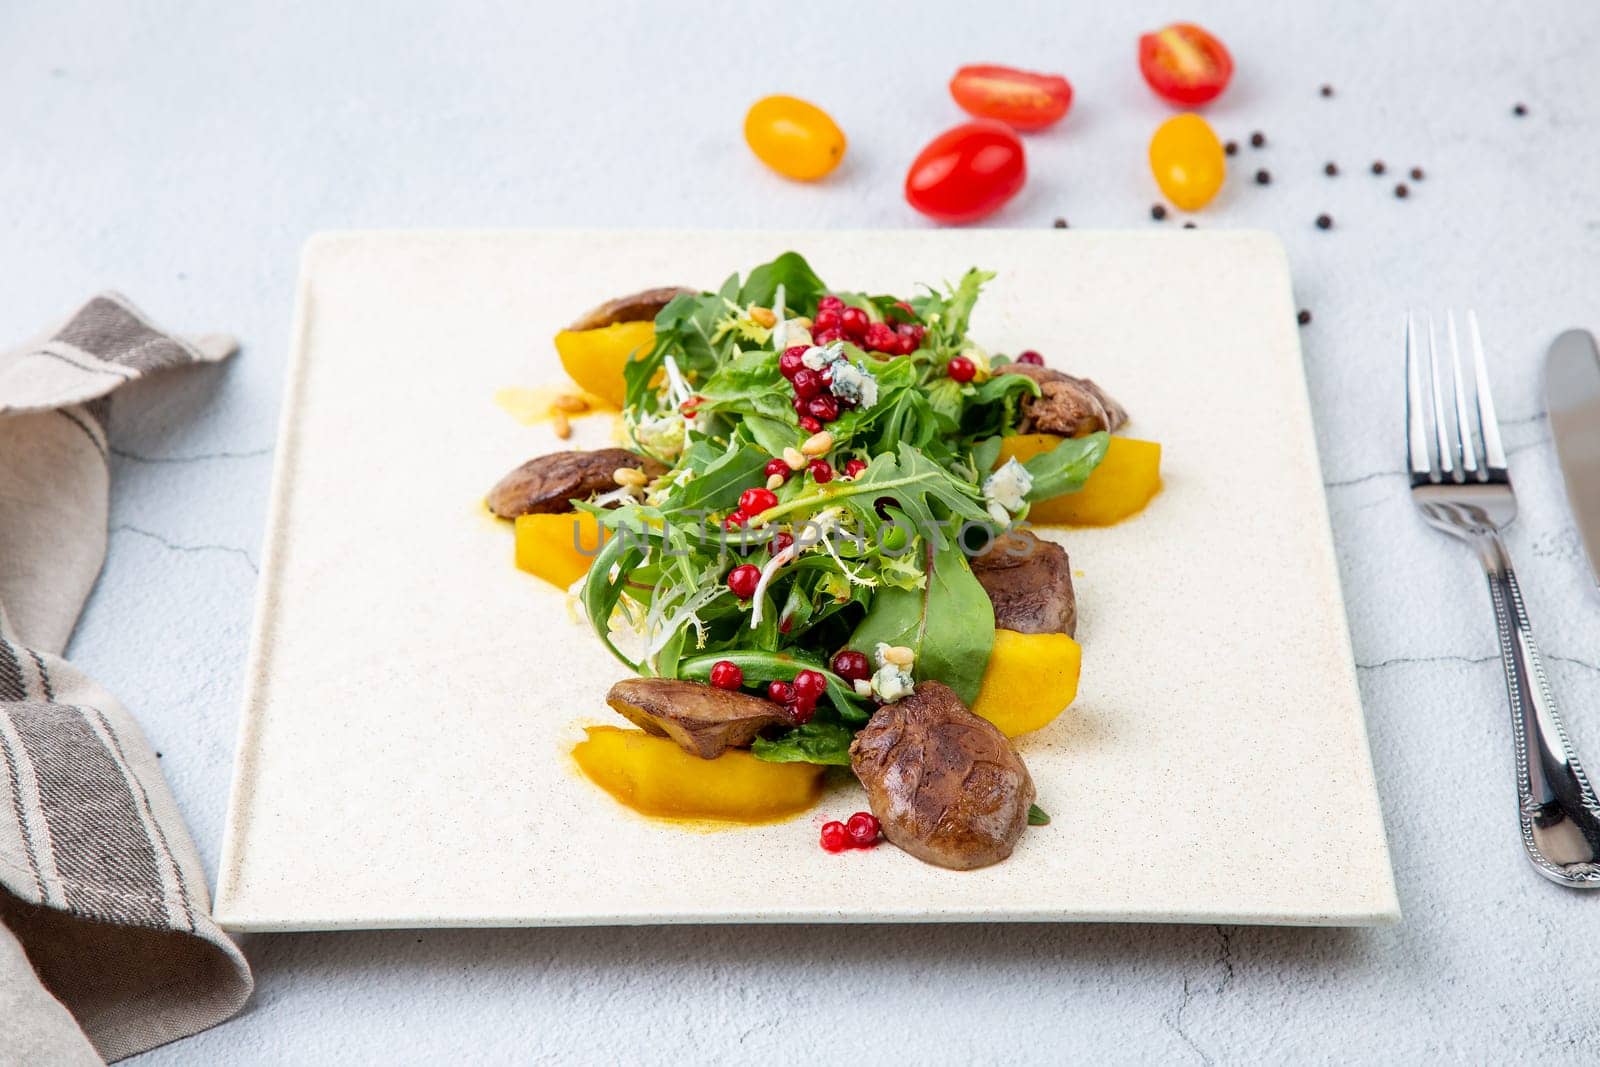 meat medallions with arugula, peach slices and red berries